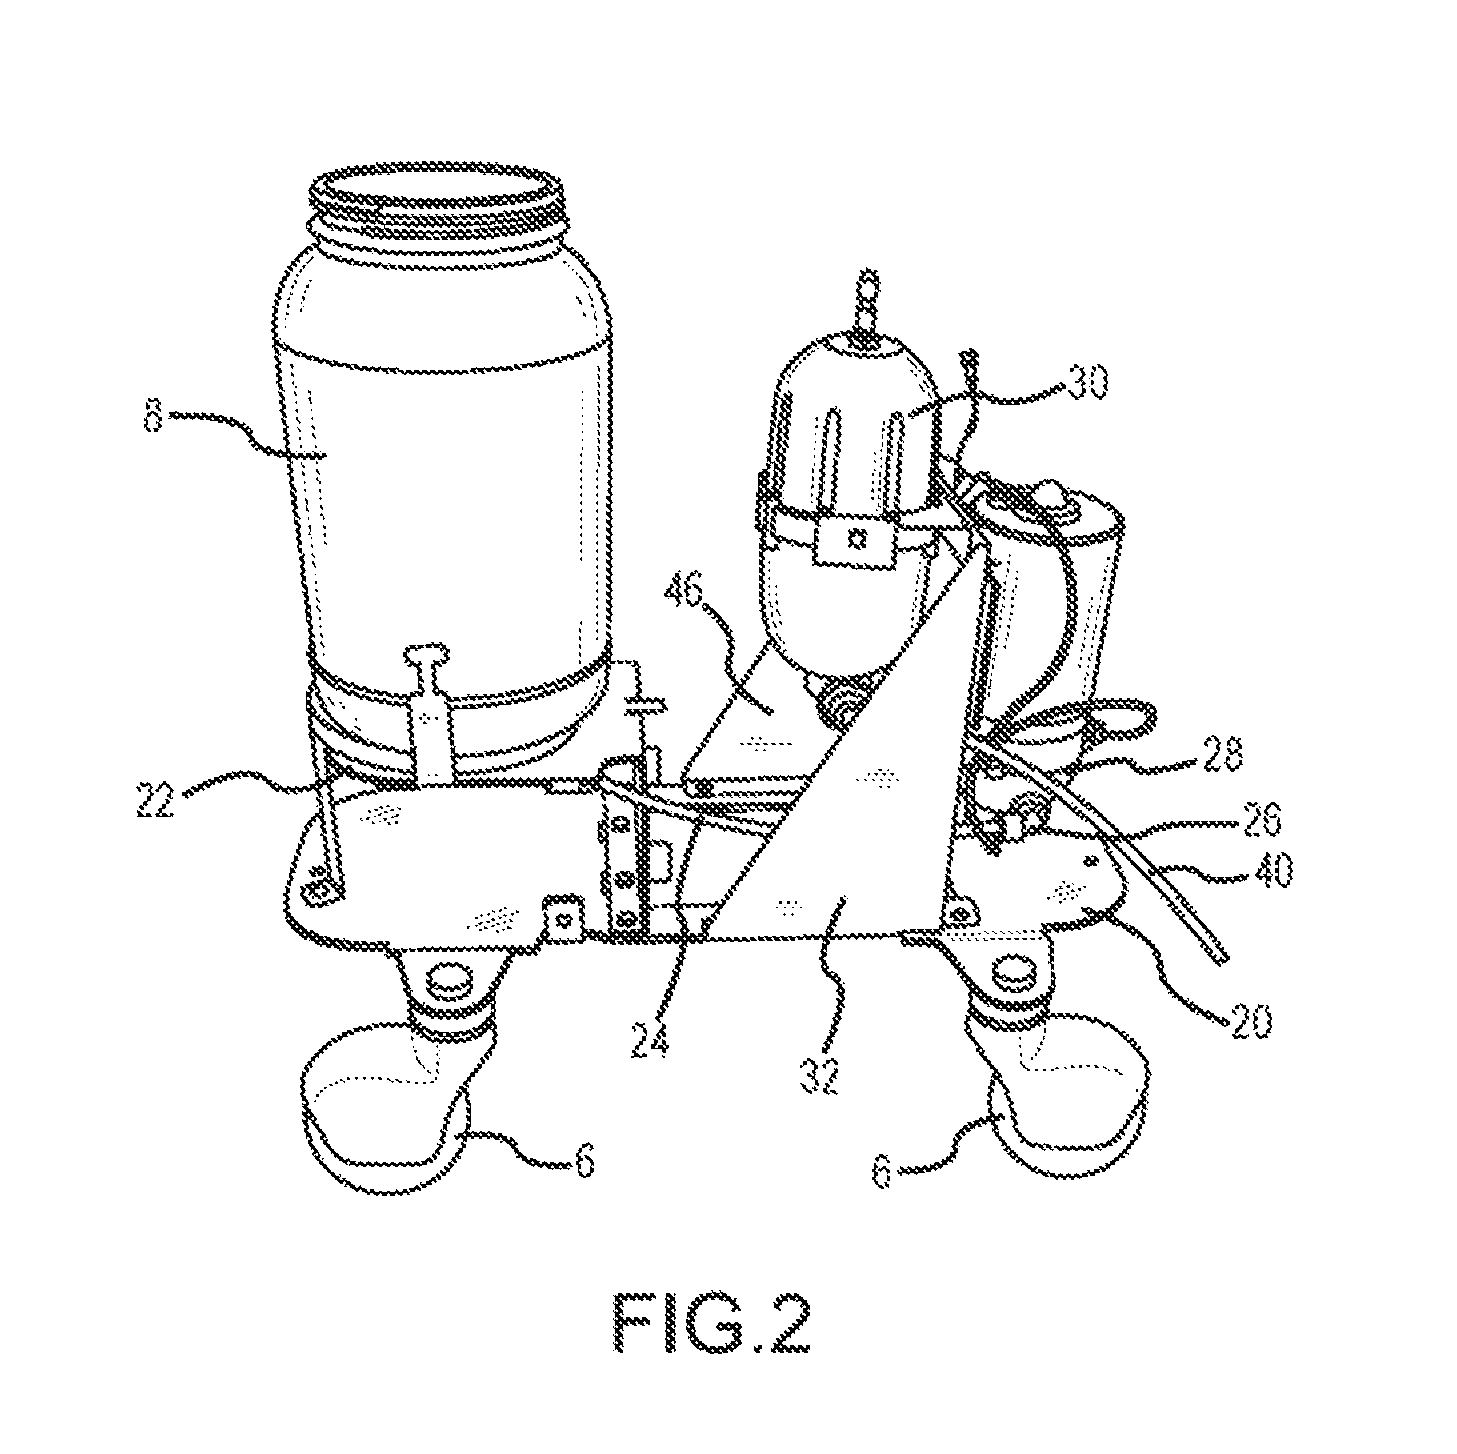 Self-contained spray apparatus for disinfectants